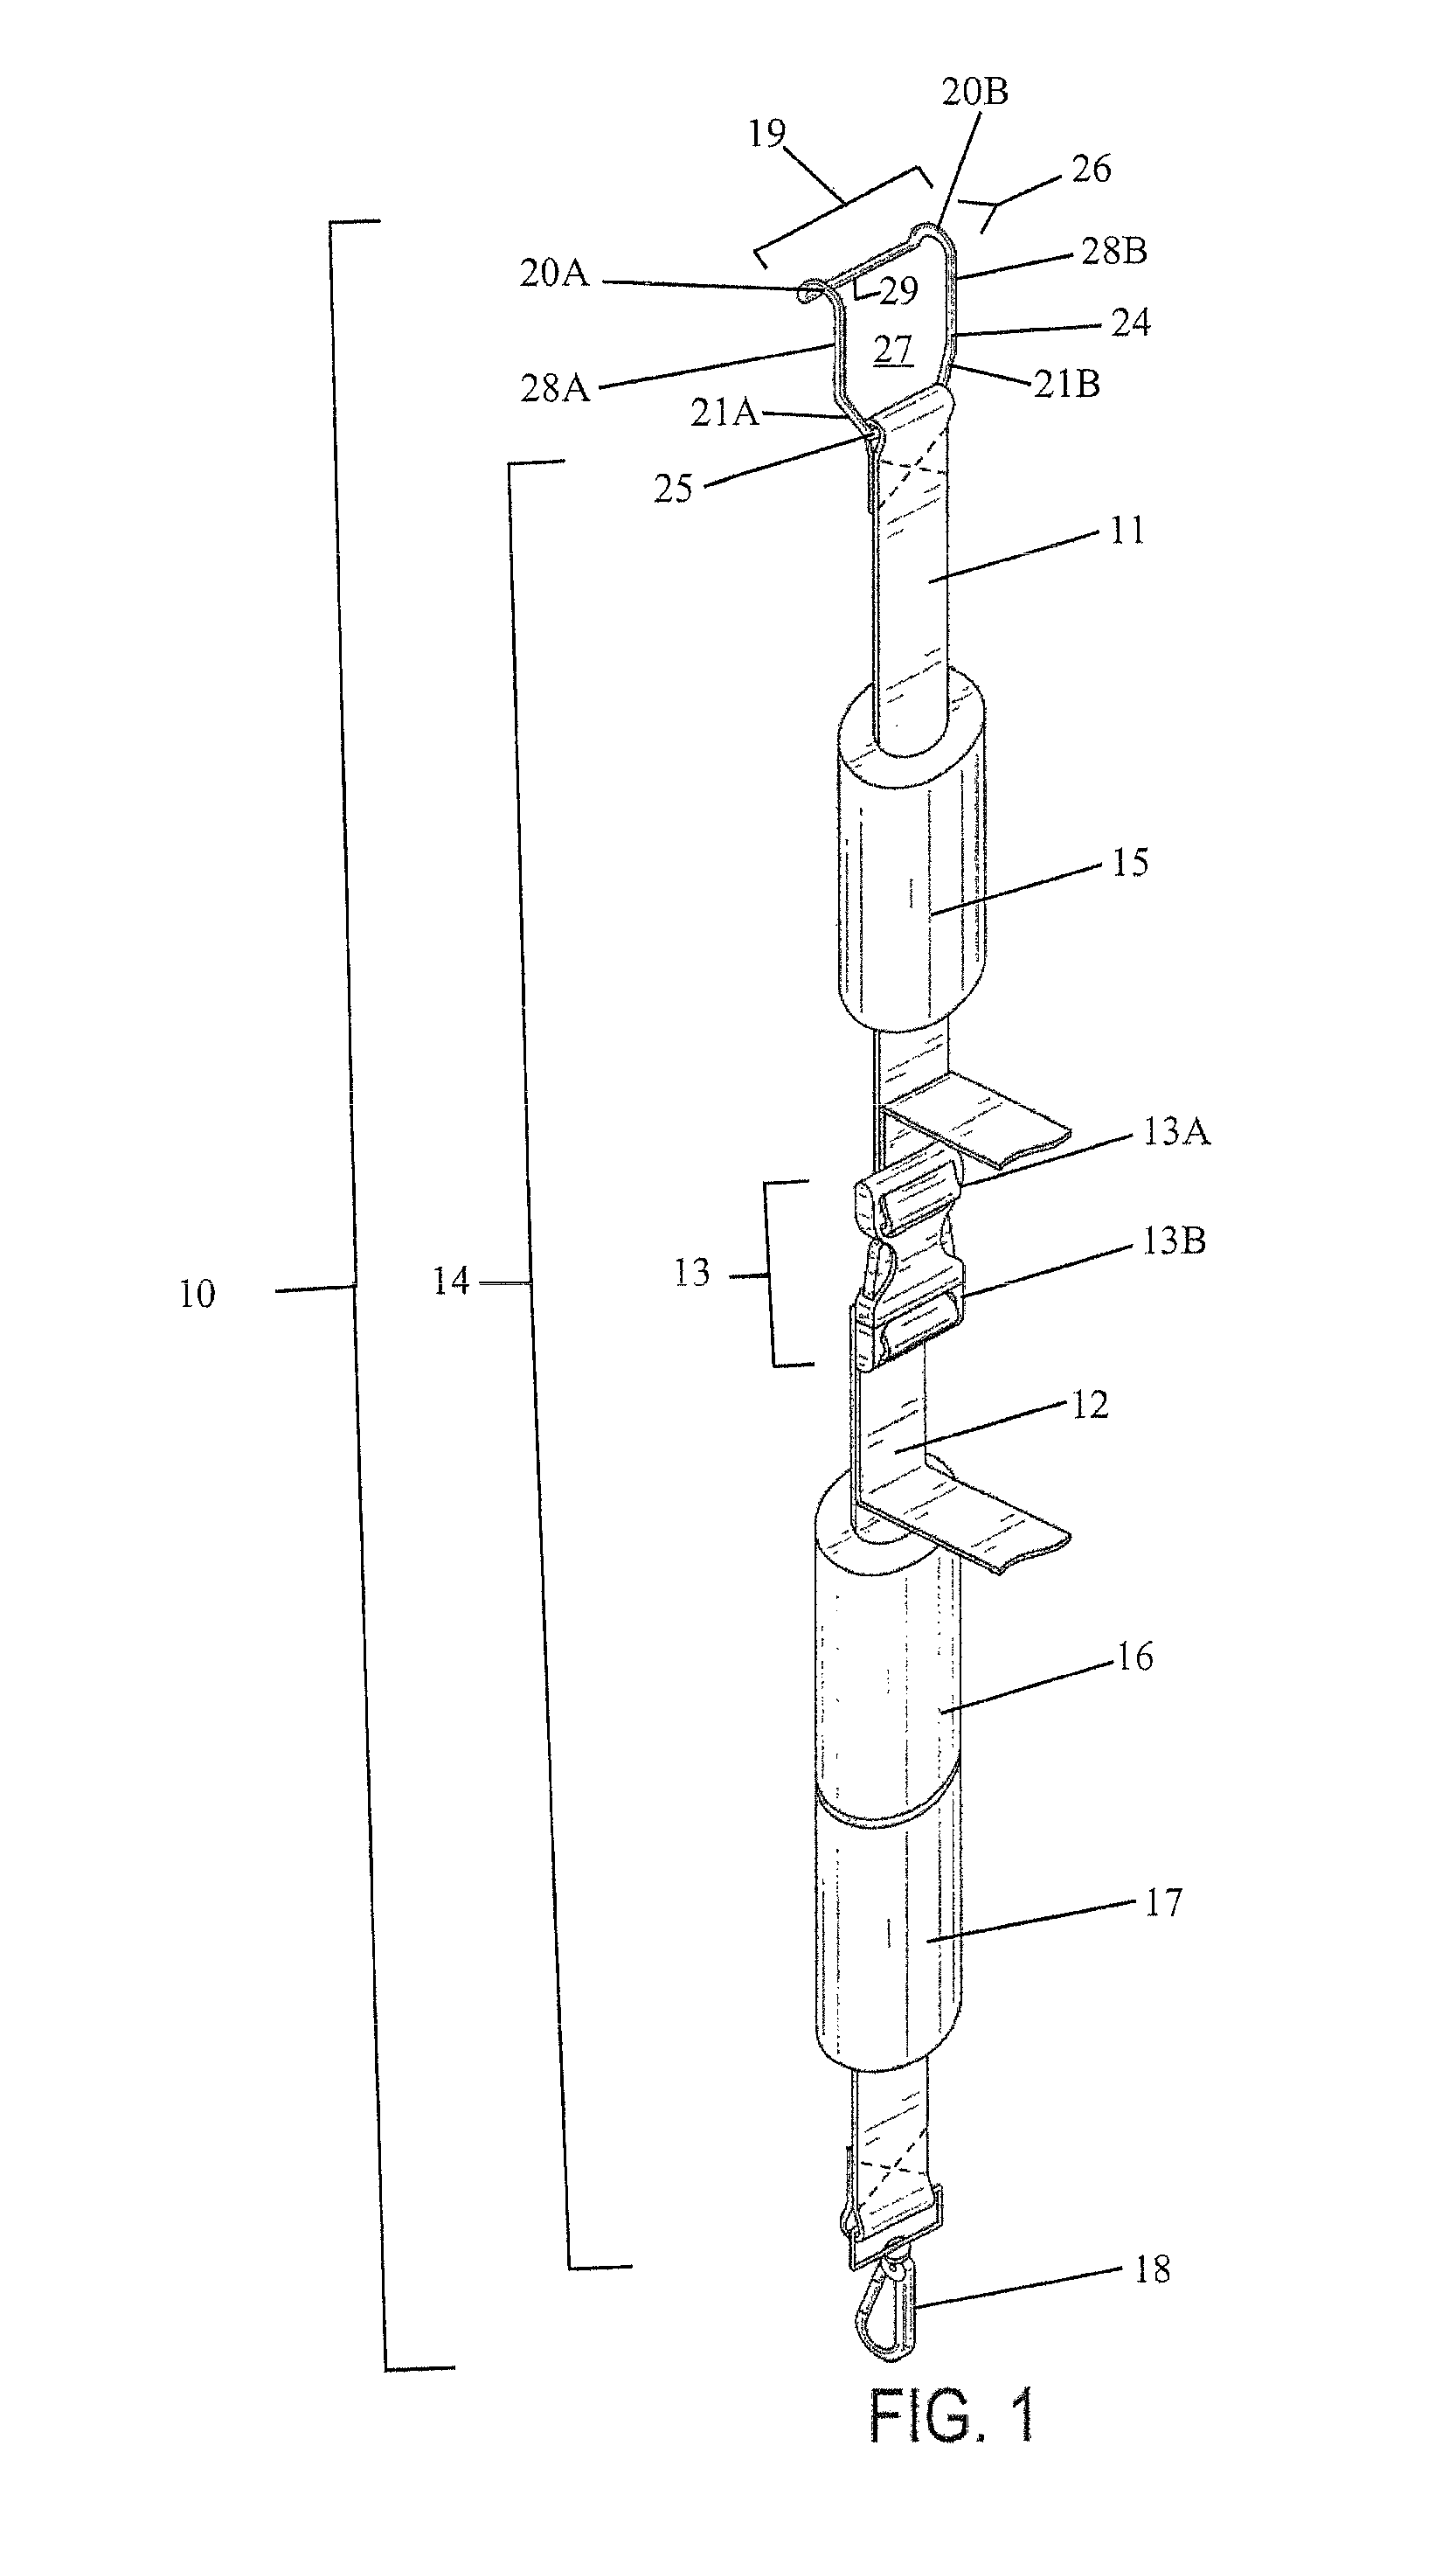 Vehicle tie-down device for hauling a load